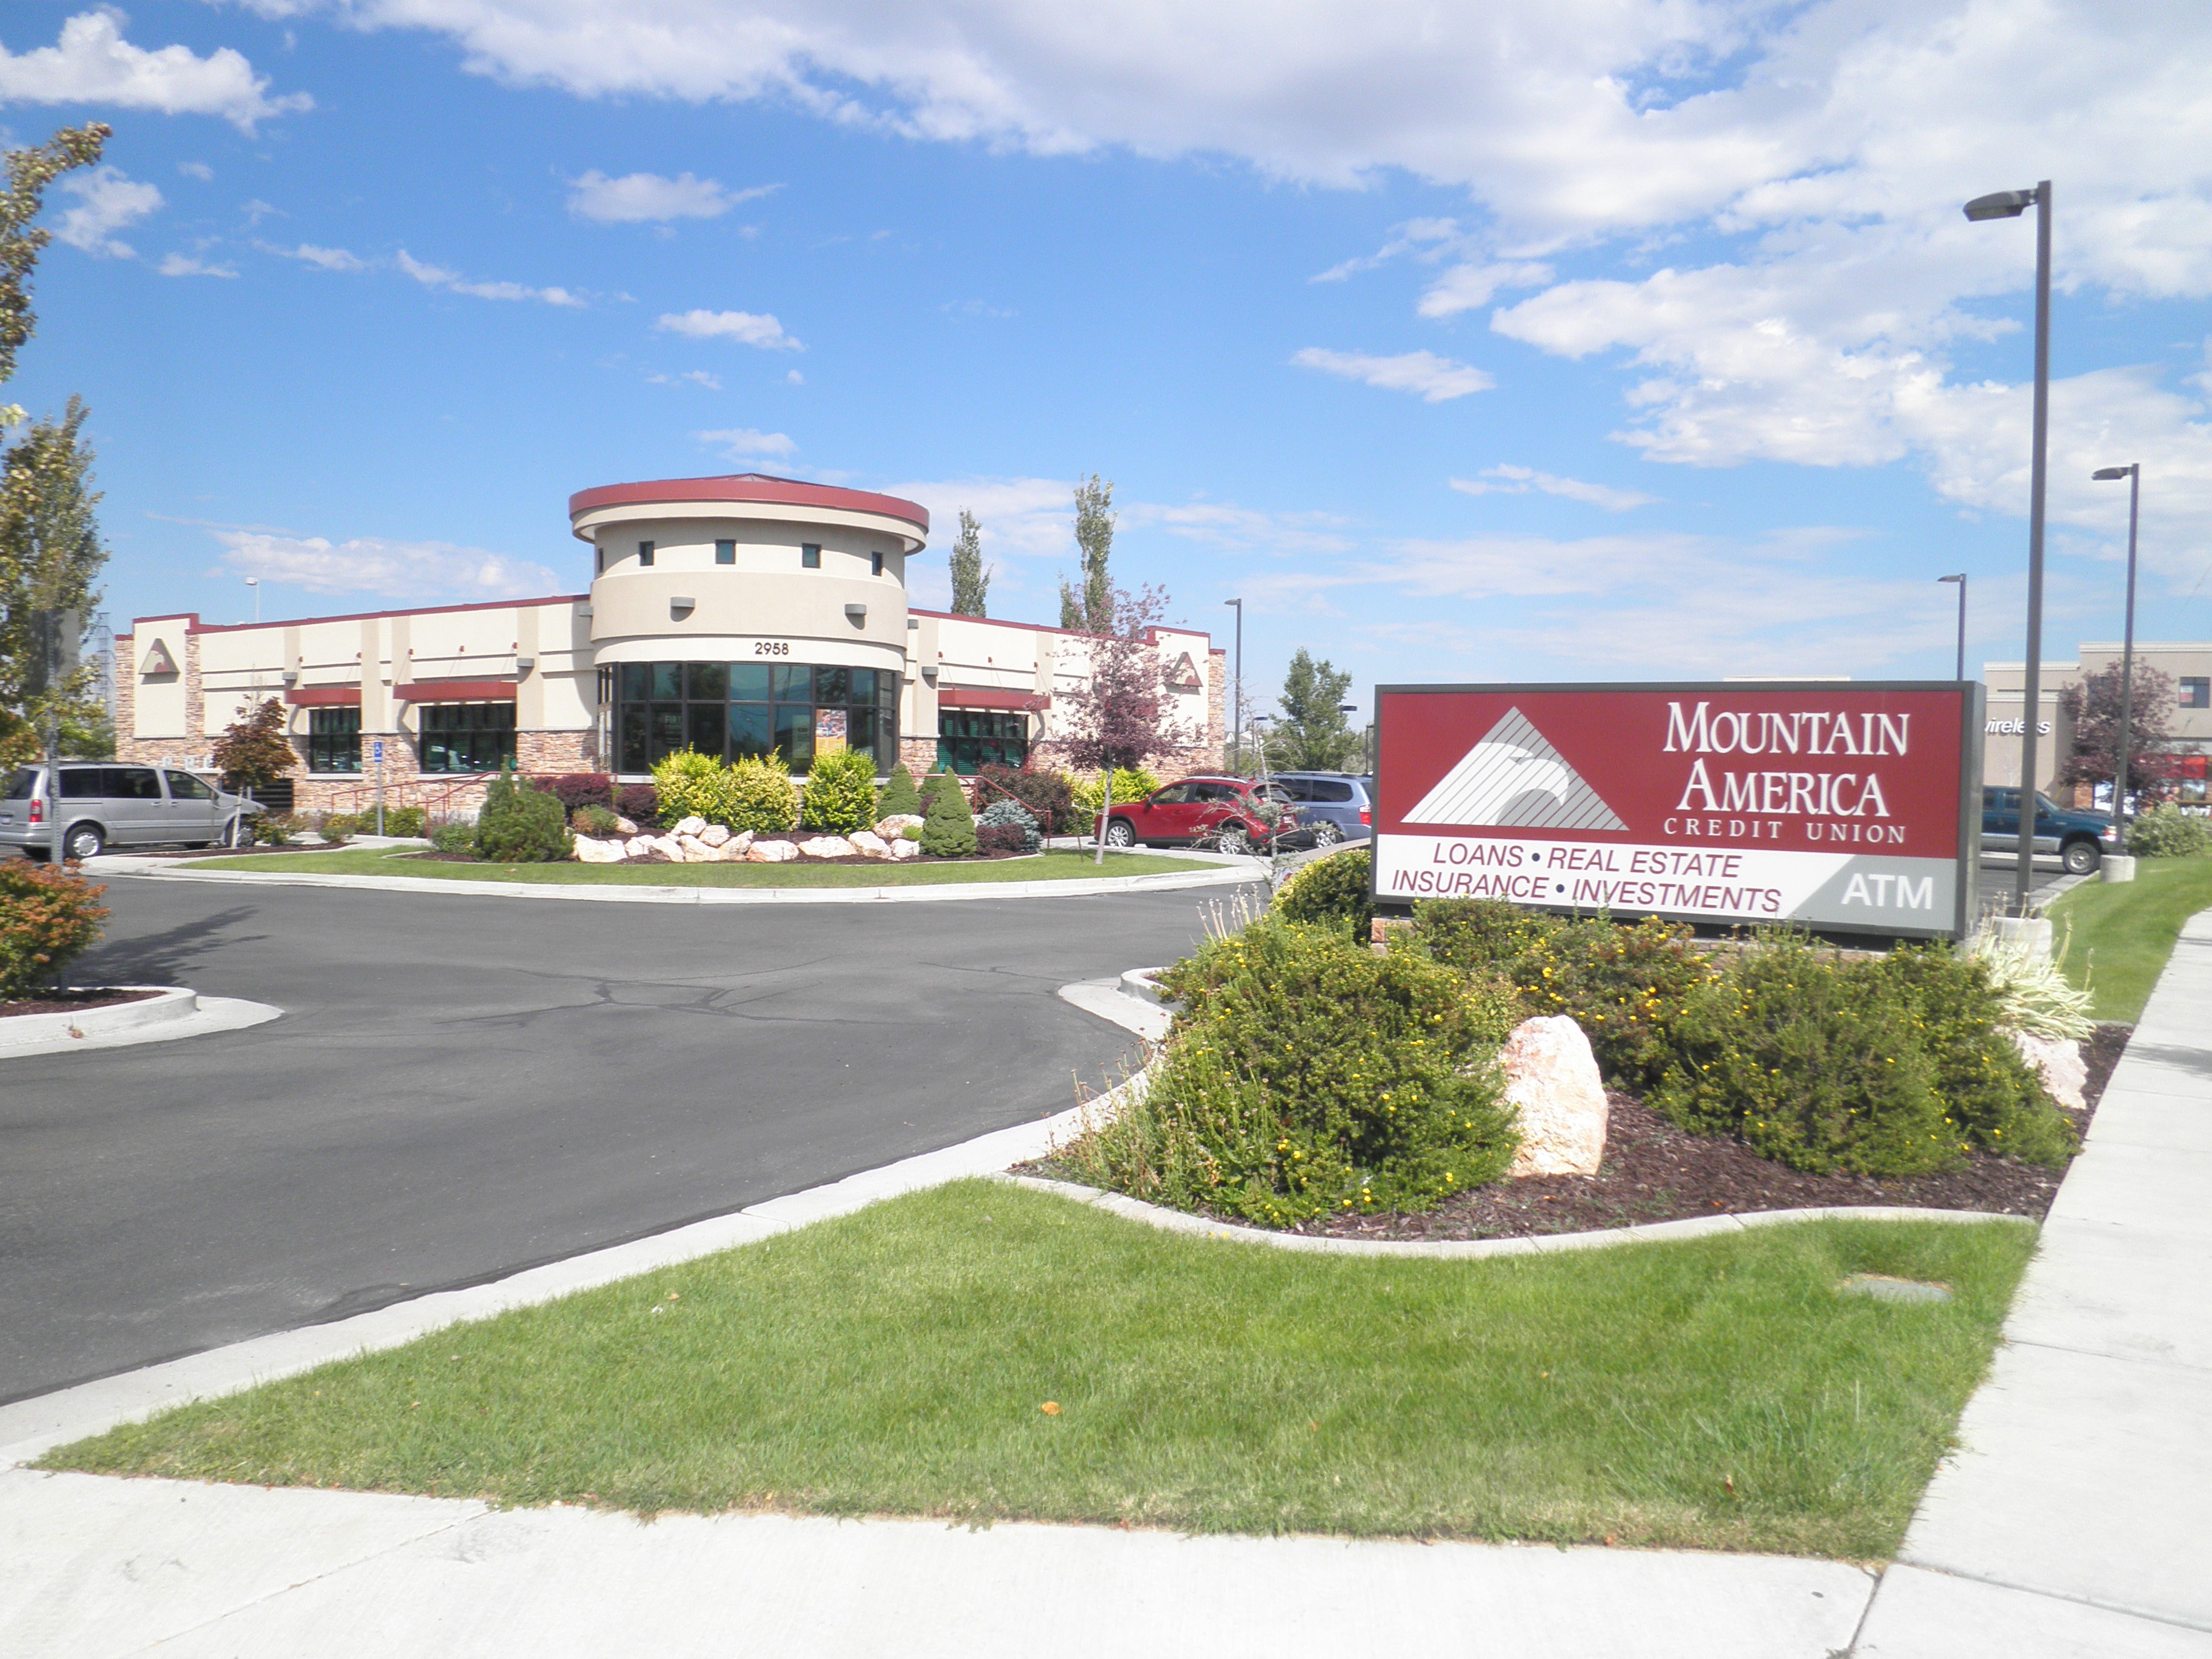 Mountain America Credit Union - West Valley 5600 West Branch